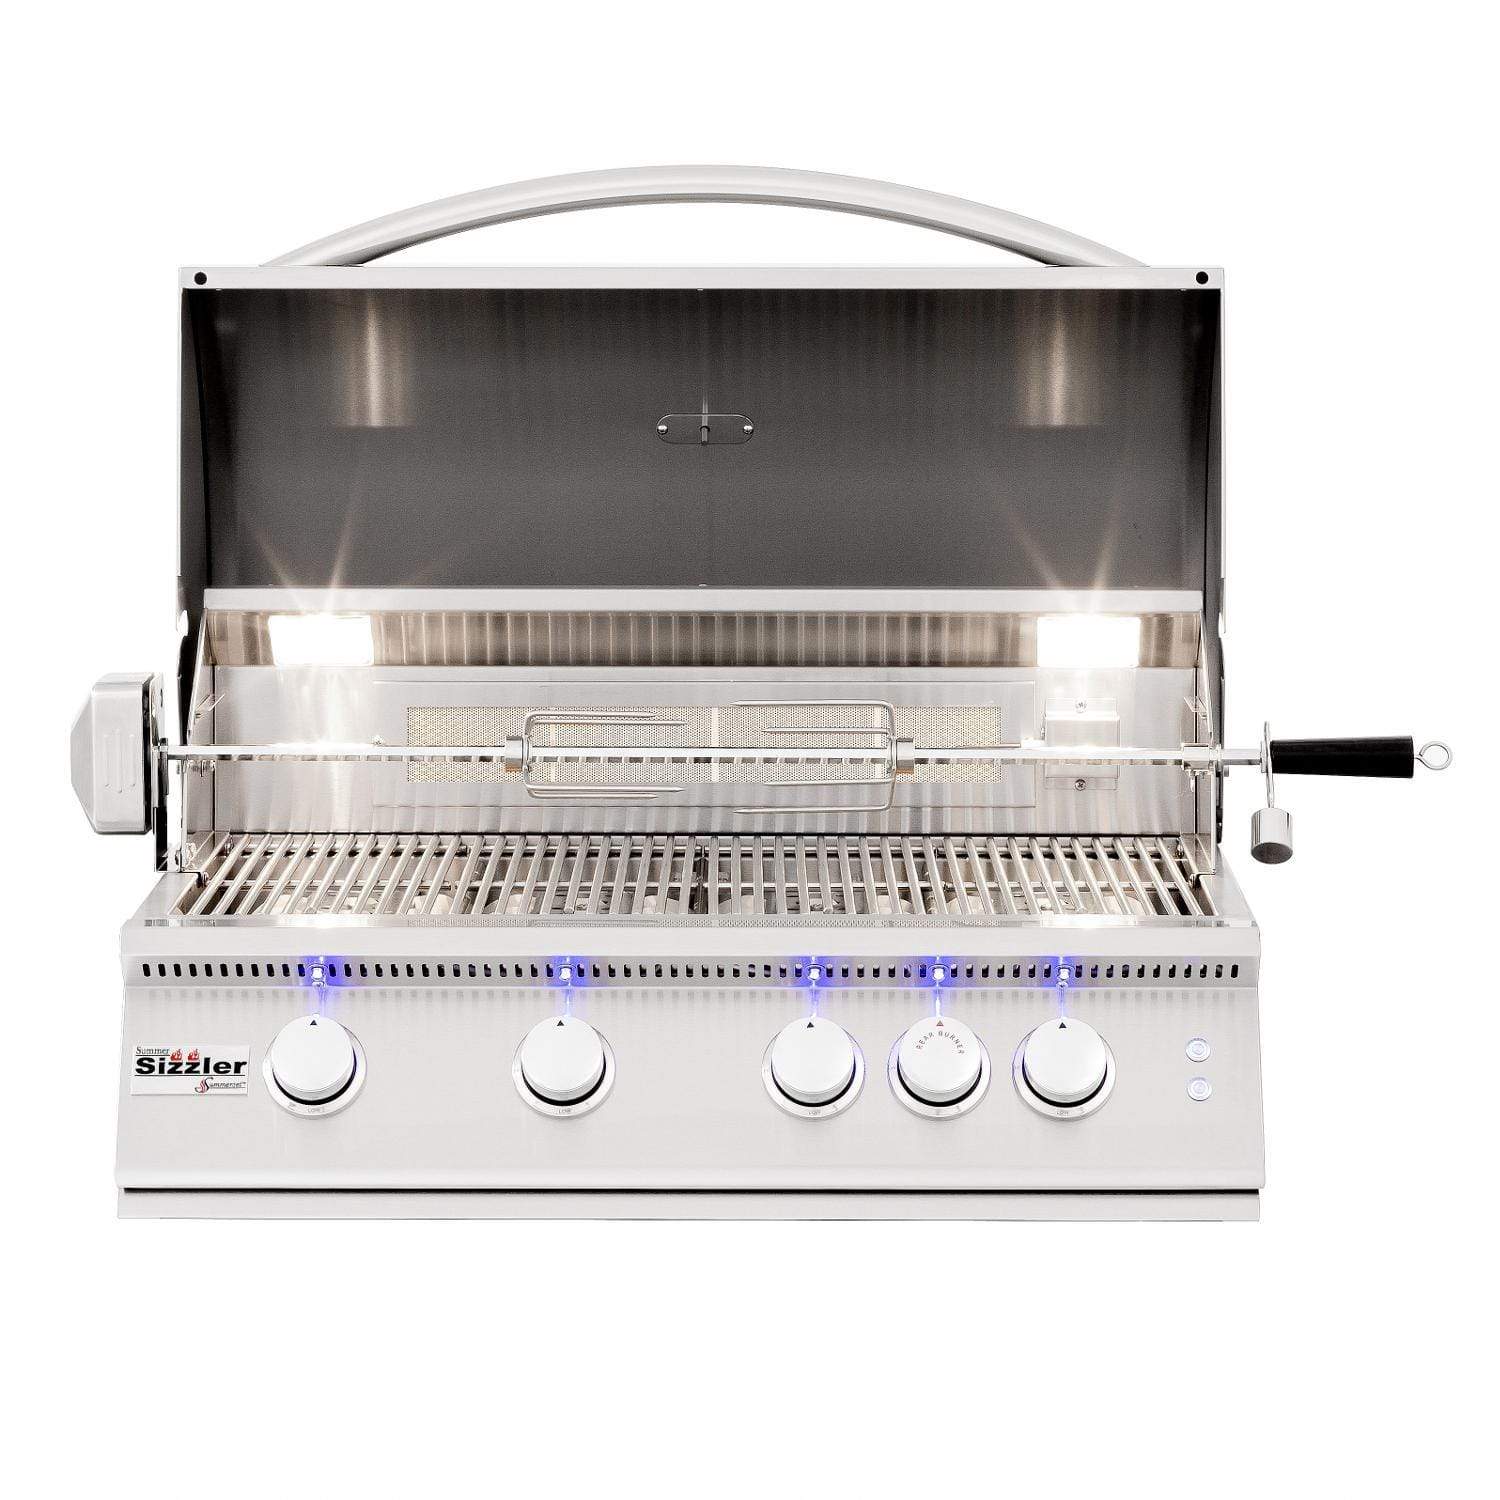 Summerset Grills Premium Gas Grill Summerset Sizzler Pro 32-Inch 4-Burner| Free Standing | Natural Gas OR Propane | Gas Grill With Rear Infrared Burner - SIZPRO32